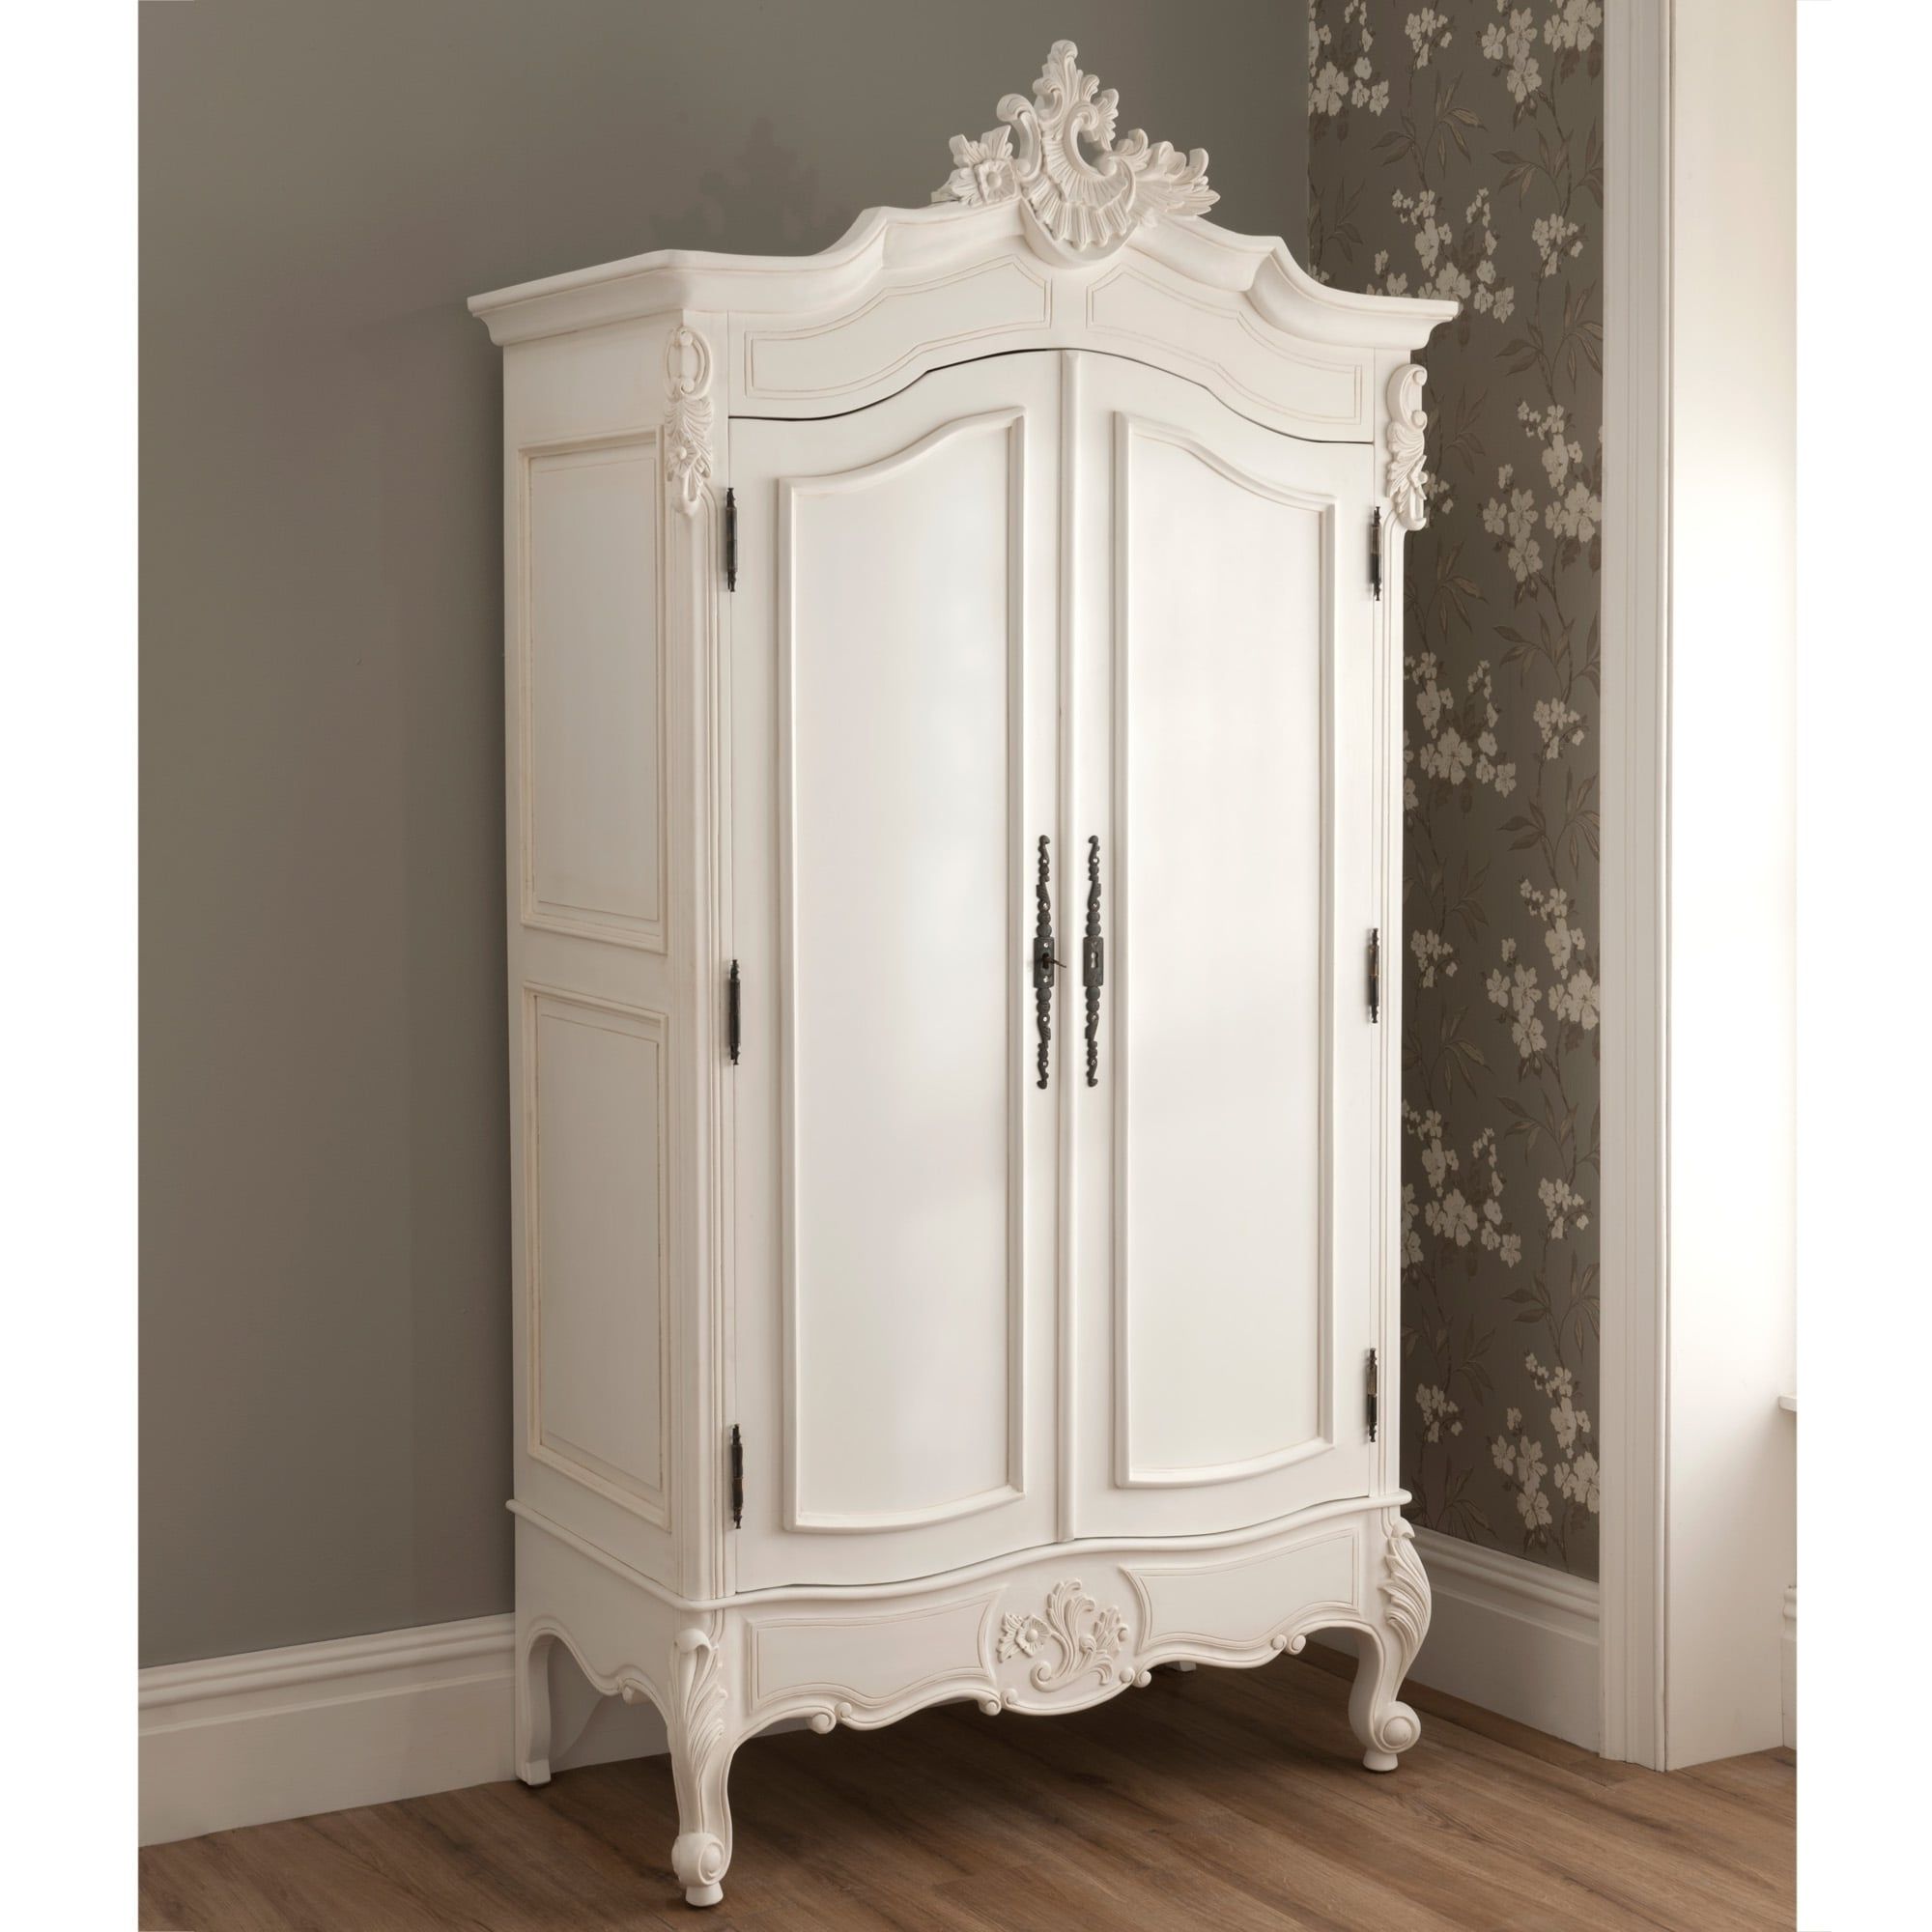 Best And Newest Armoire French Wardrobes Throughout 2 Door La Rochelle Antique French Wardrobe (View 1 of 15)